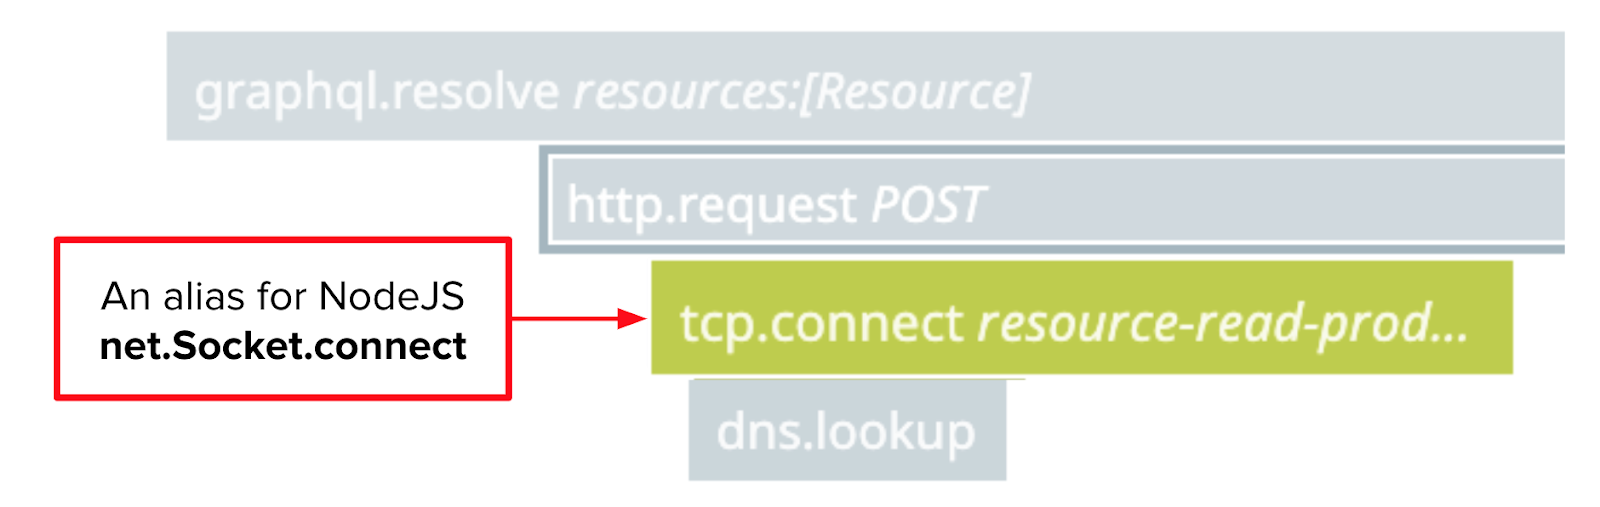 net.Socket.connect is aliased as tcp.connect